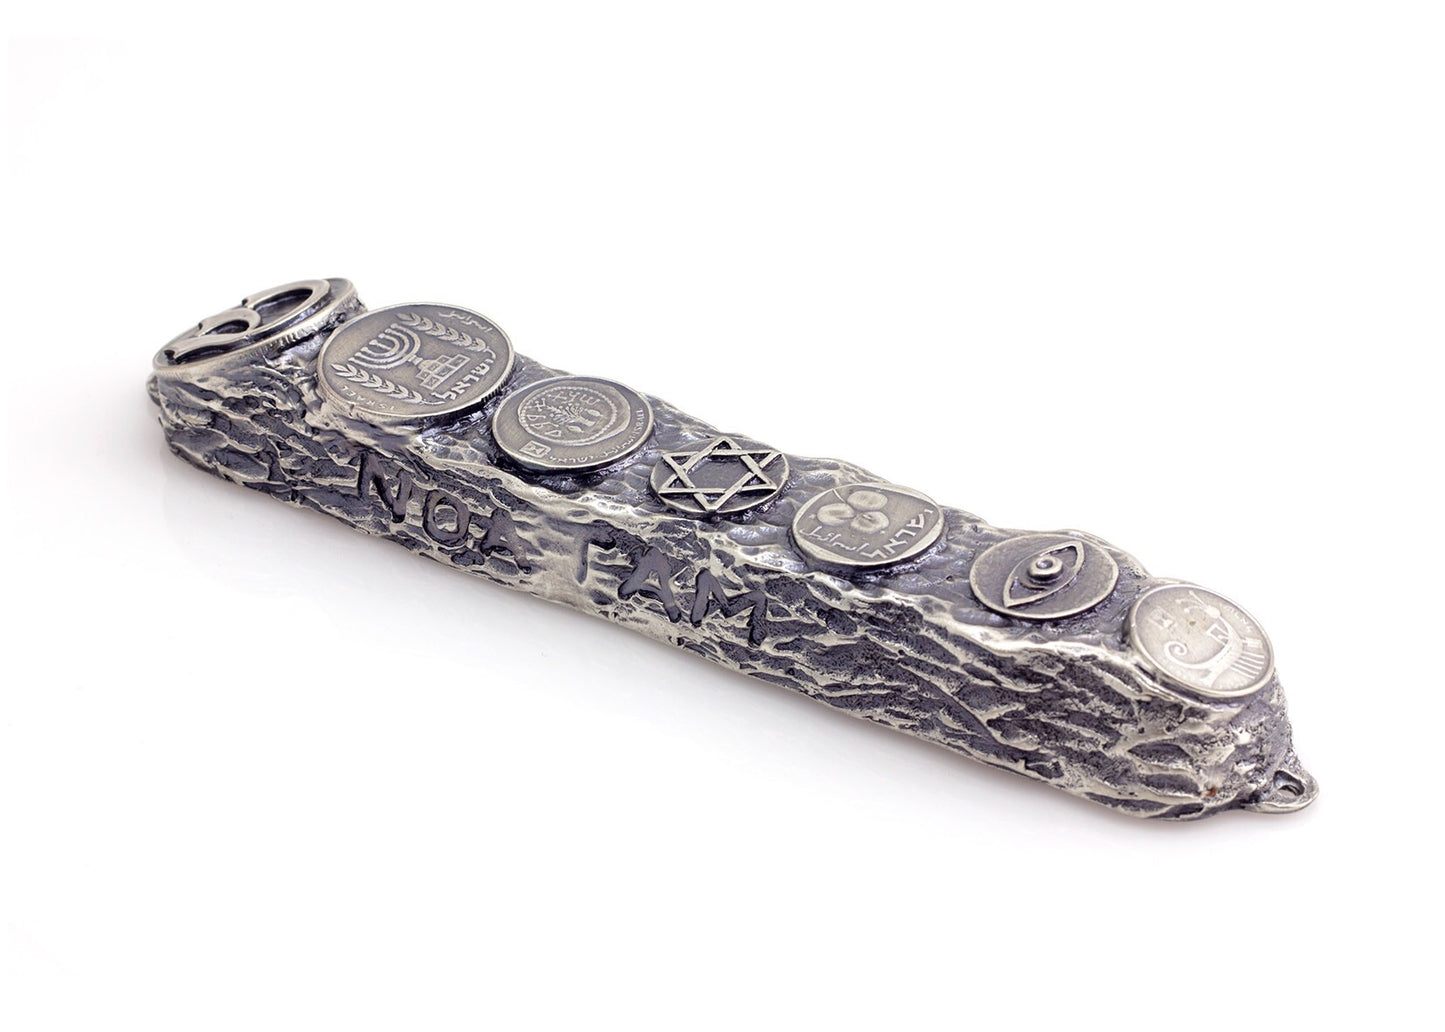 Silver Mezuzah Case, Sterling Silver Mezuzah with Scroll for Door, Ornate Mezuzah, Intricate Royal Mezzuzahs, Judaica Gifts for Home - Big (16cm)